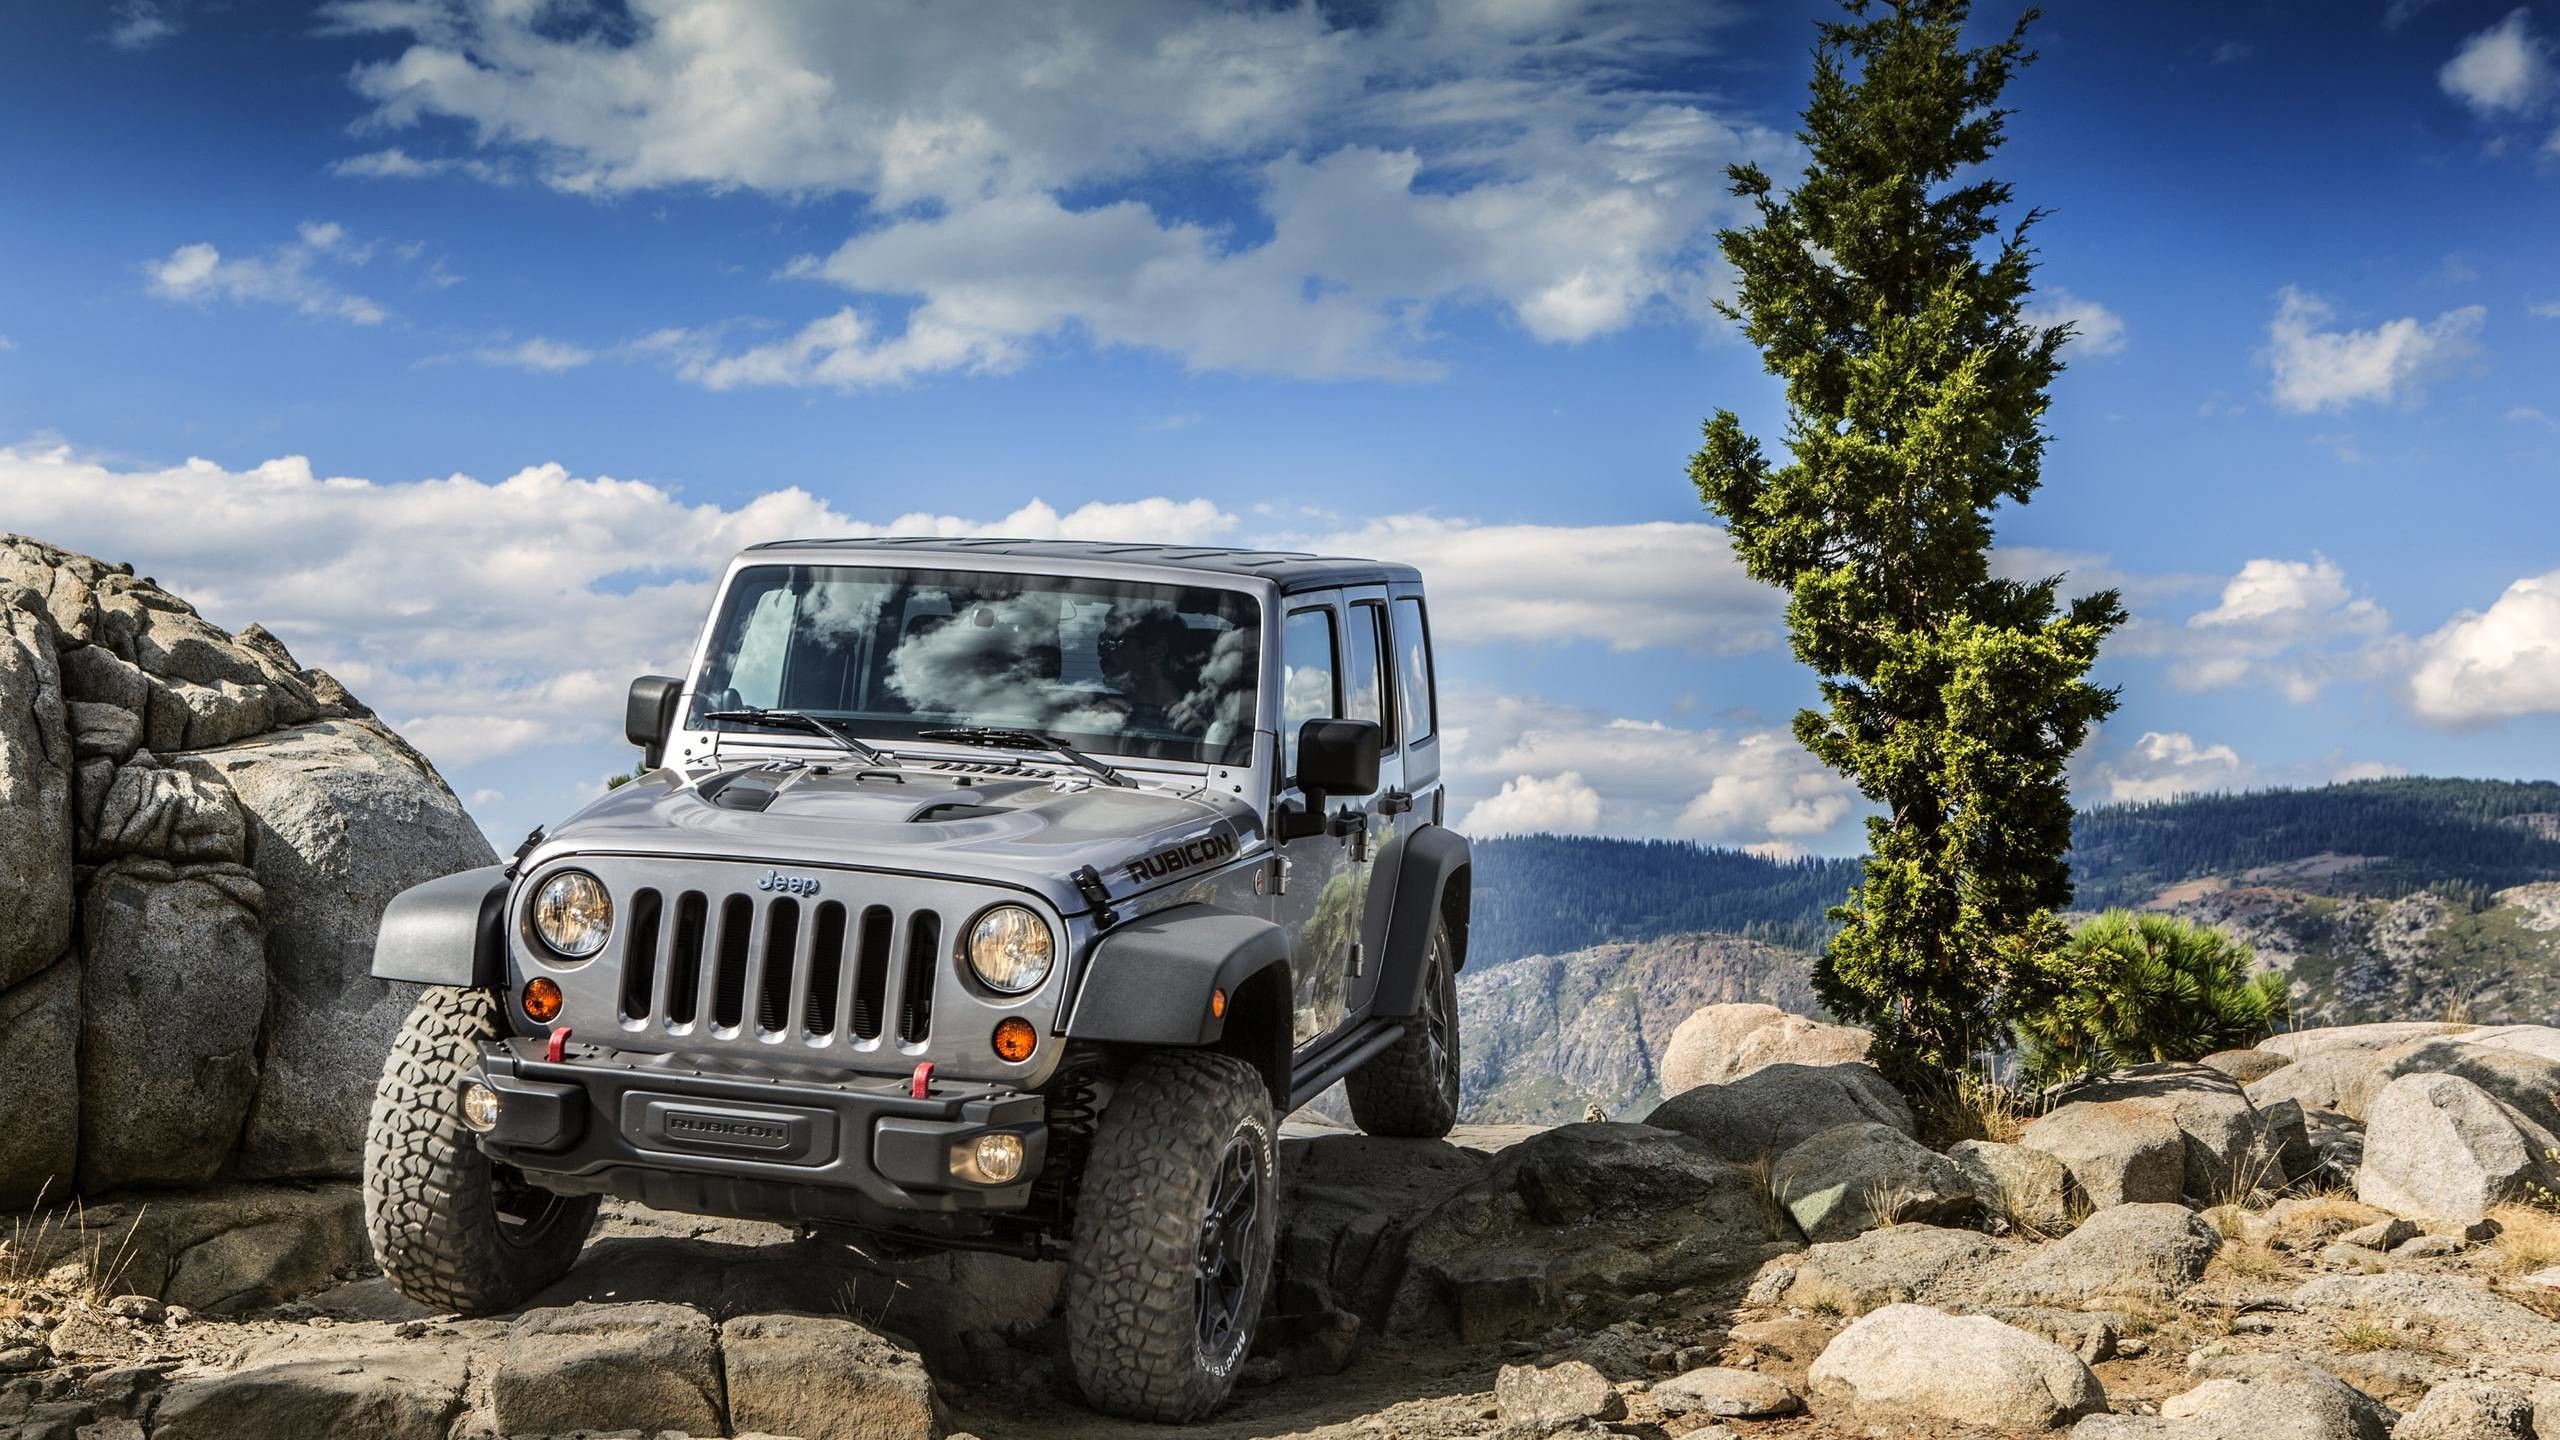 Jeep Wrangler Aesthetic Wallpapers Wallpaper Cave